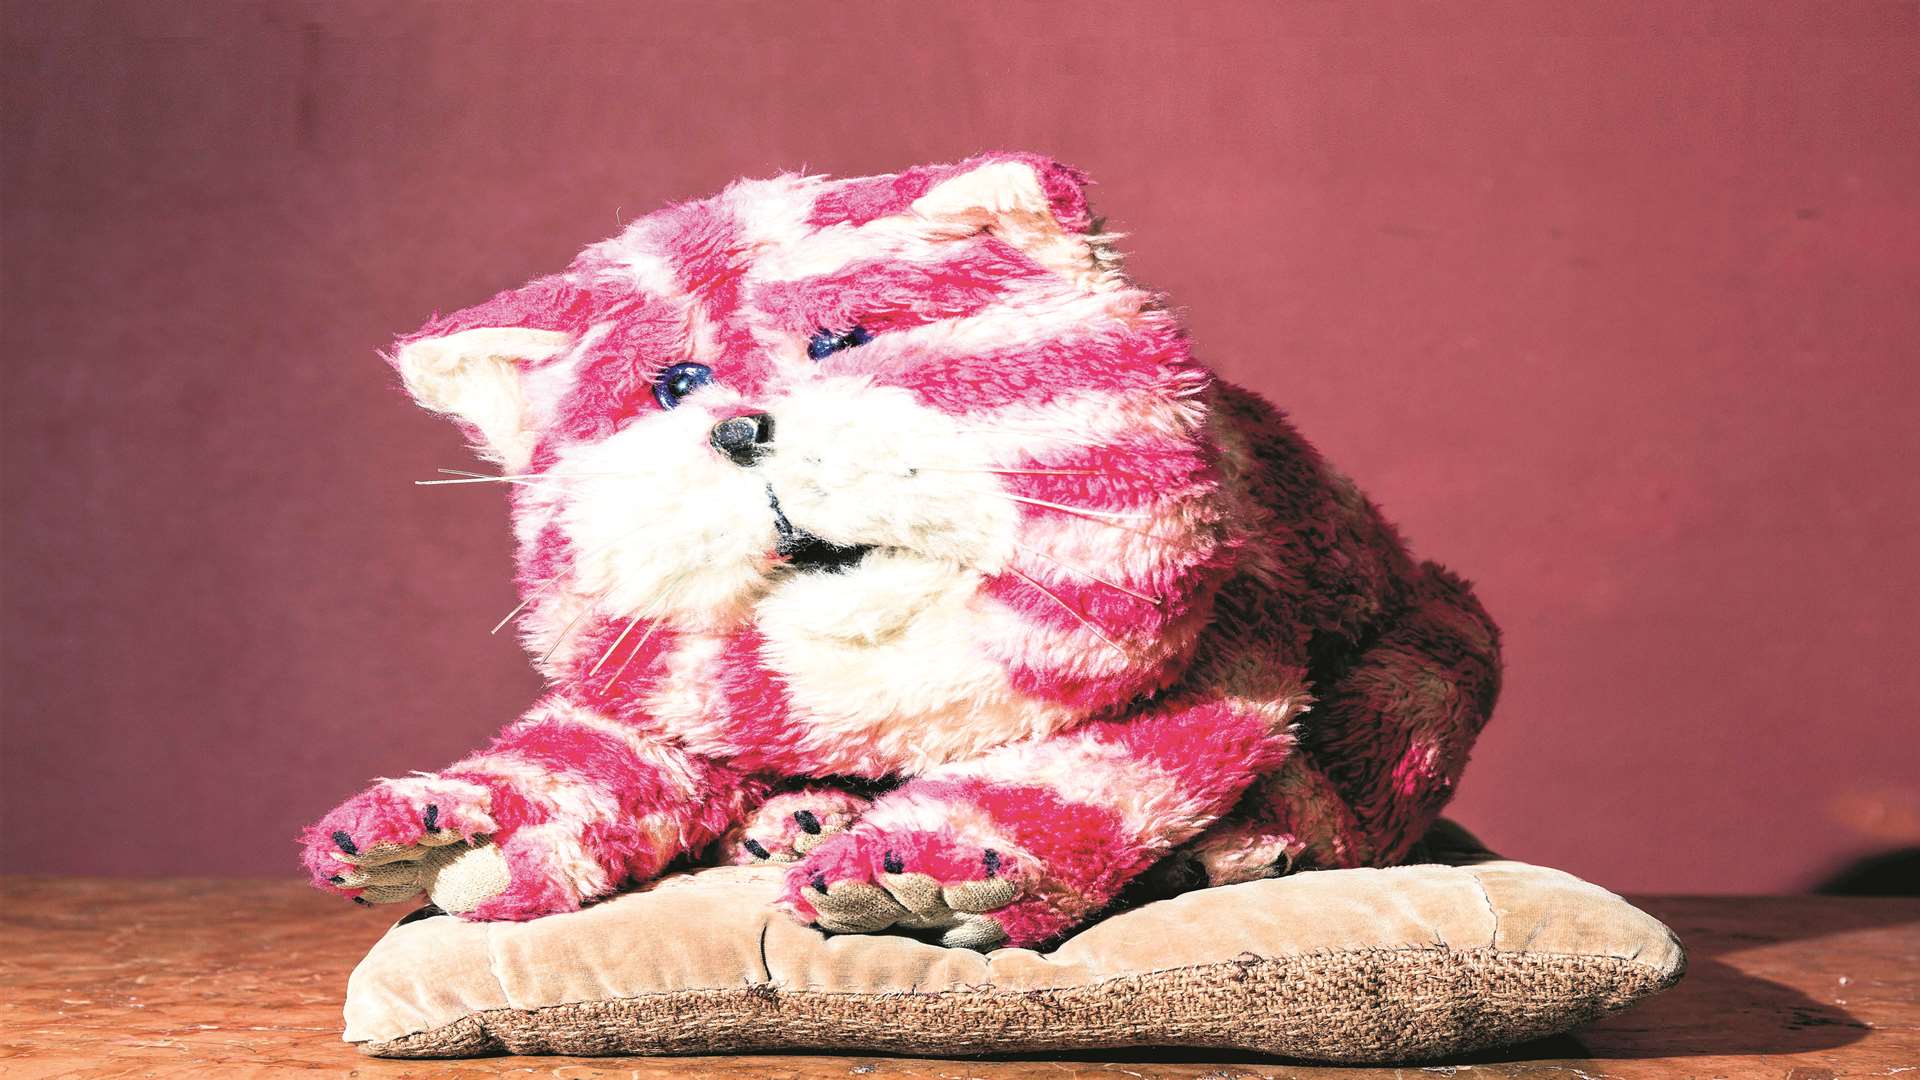 Canterbury's Bagpuss is one of the 100 Objects that Made Kent